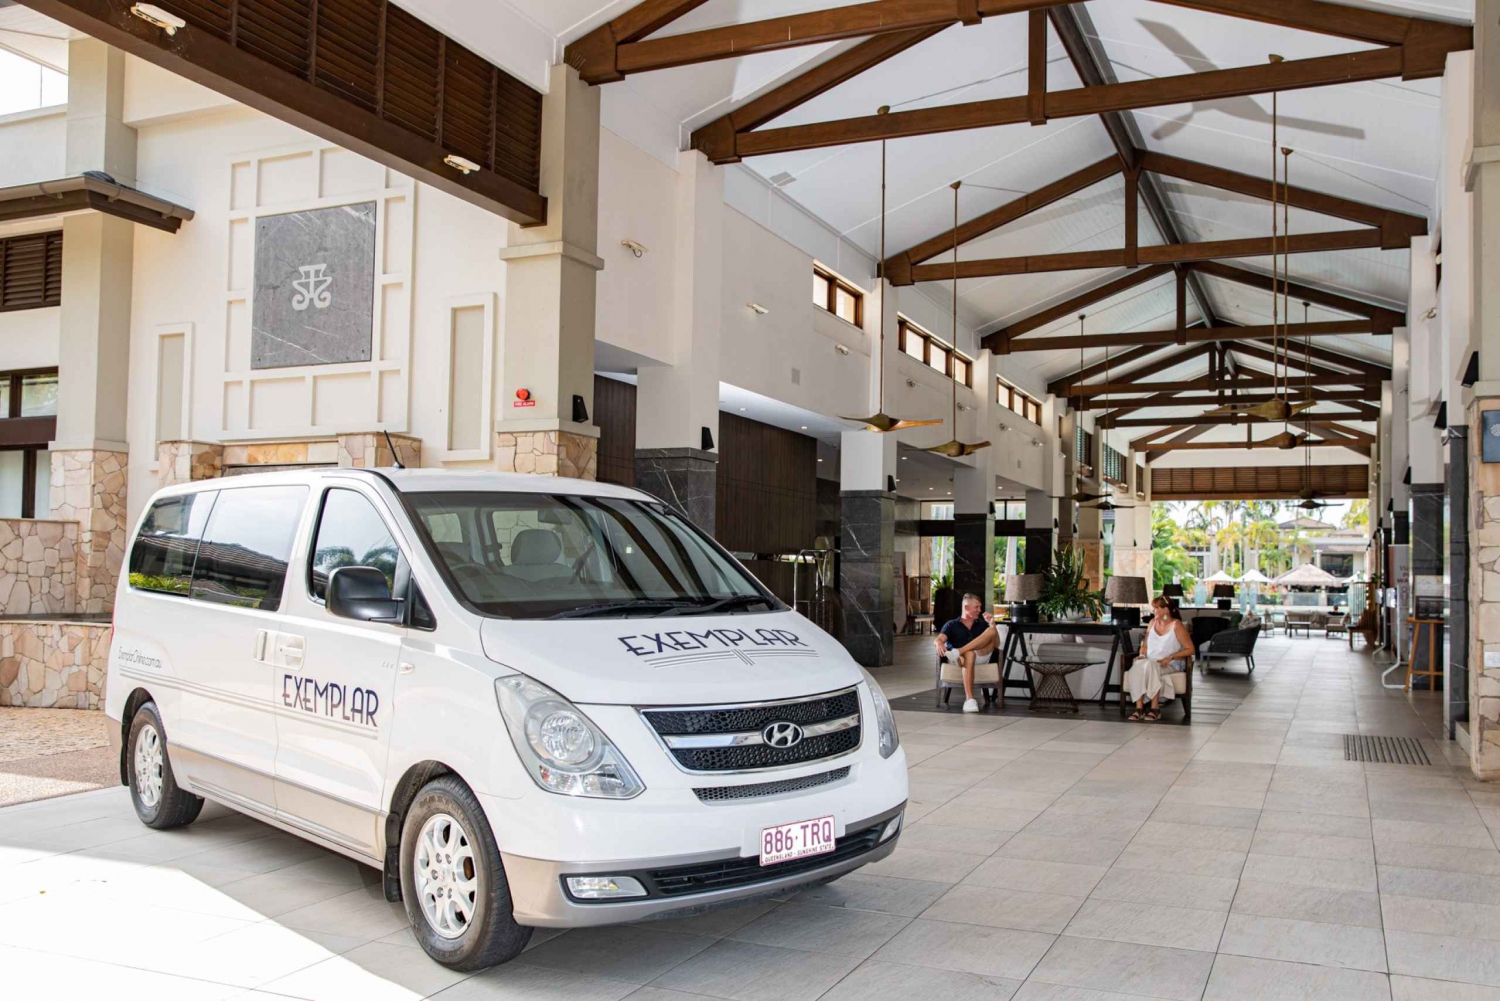 Port Douglas: Private Transfer To or From Cairns Airport